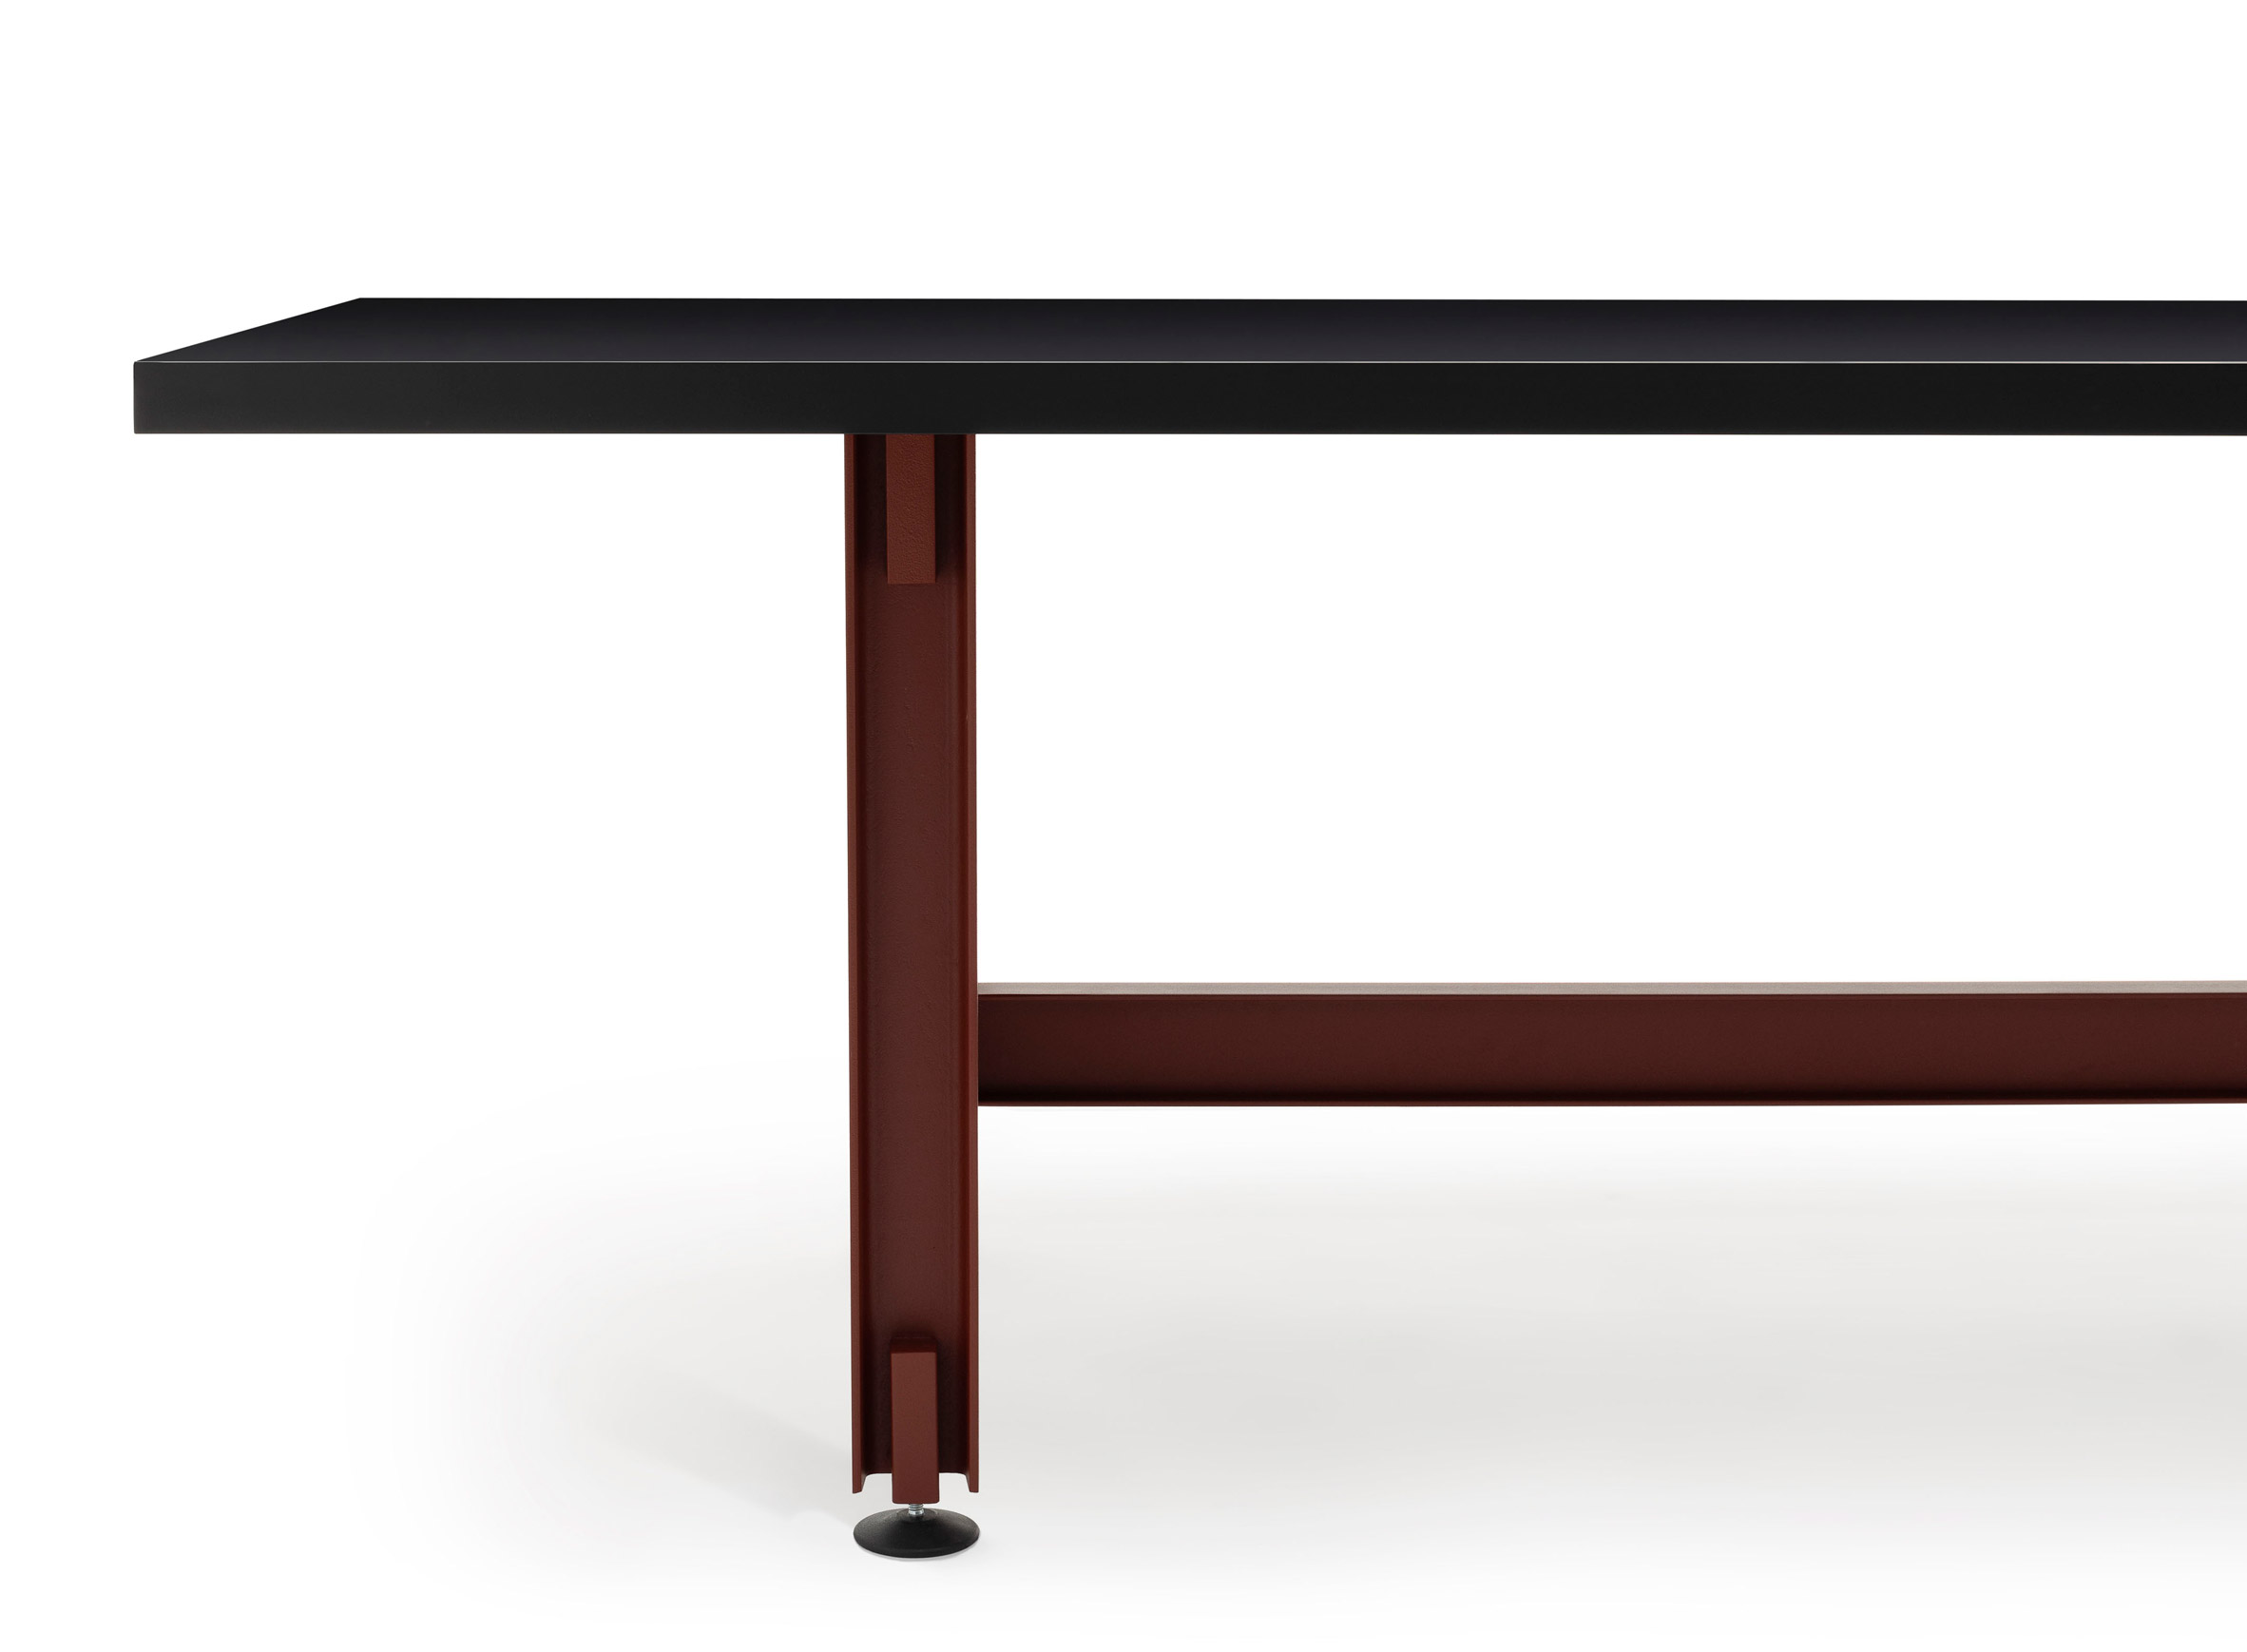 Beam Table by Konstantin Grcic for Established & Sons